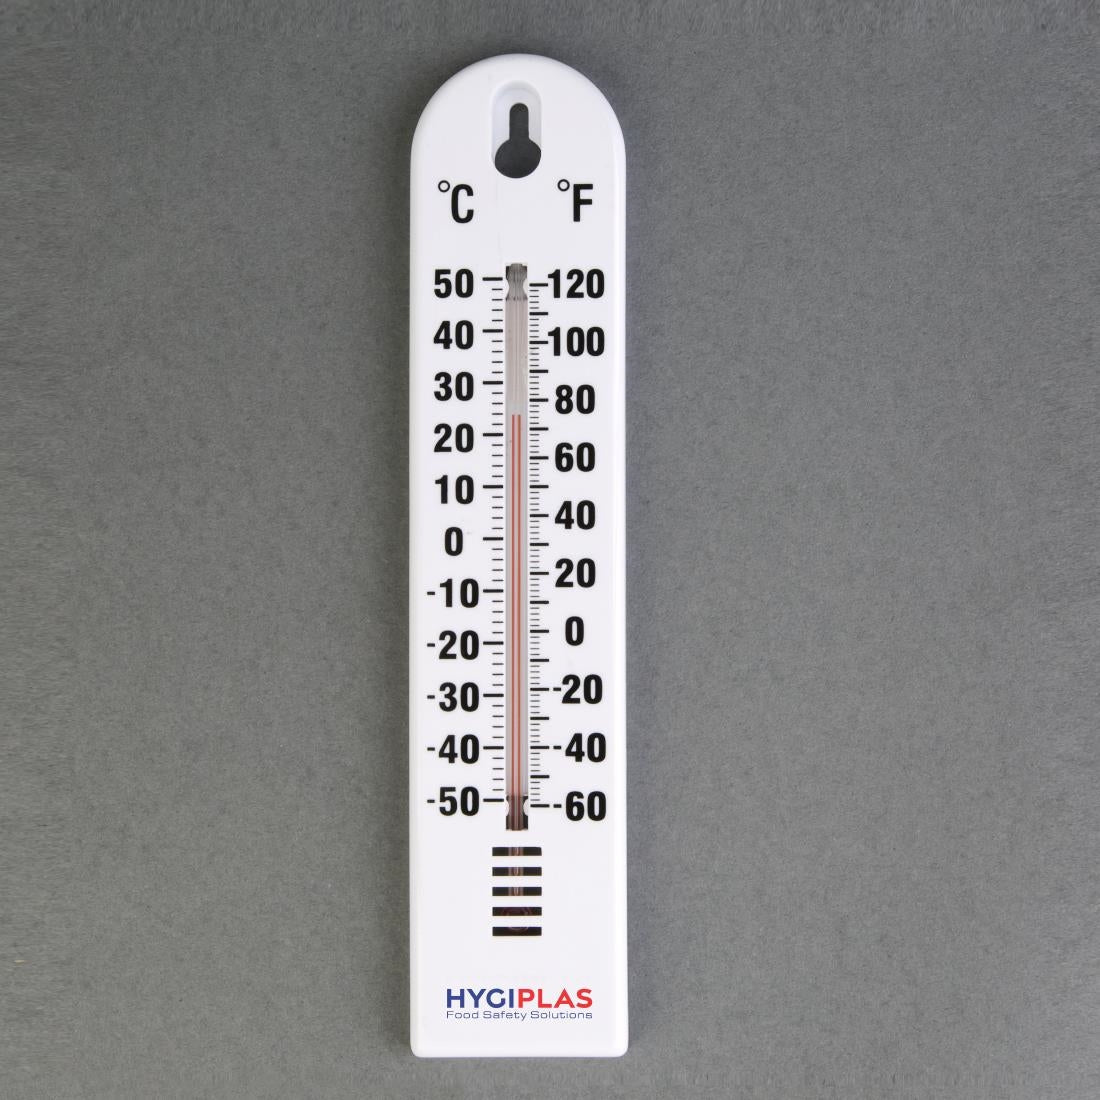 Hygiplas Wall Thermometer JD Catering Equipment Solutions Ltd